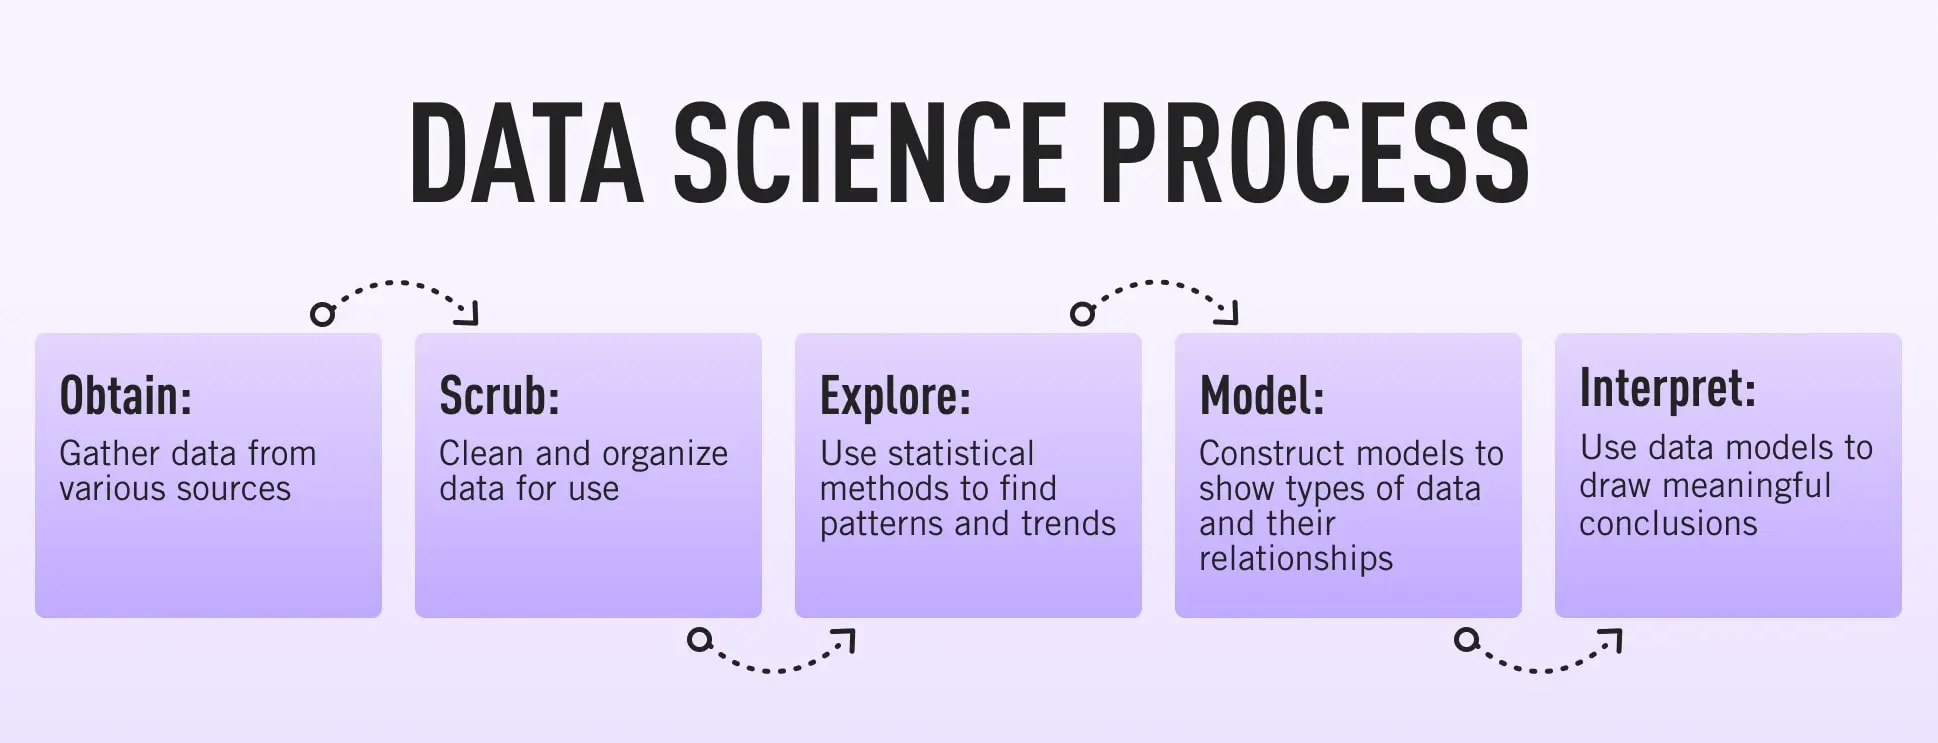 Flow chart showing the data science process (OSEMI)